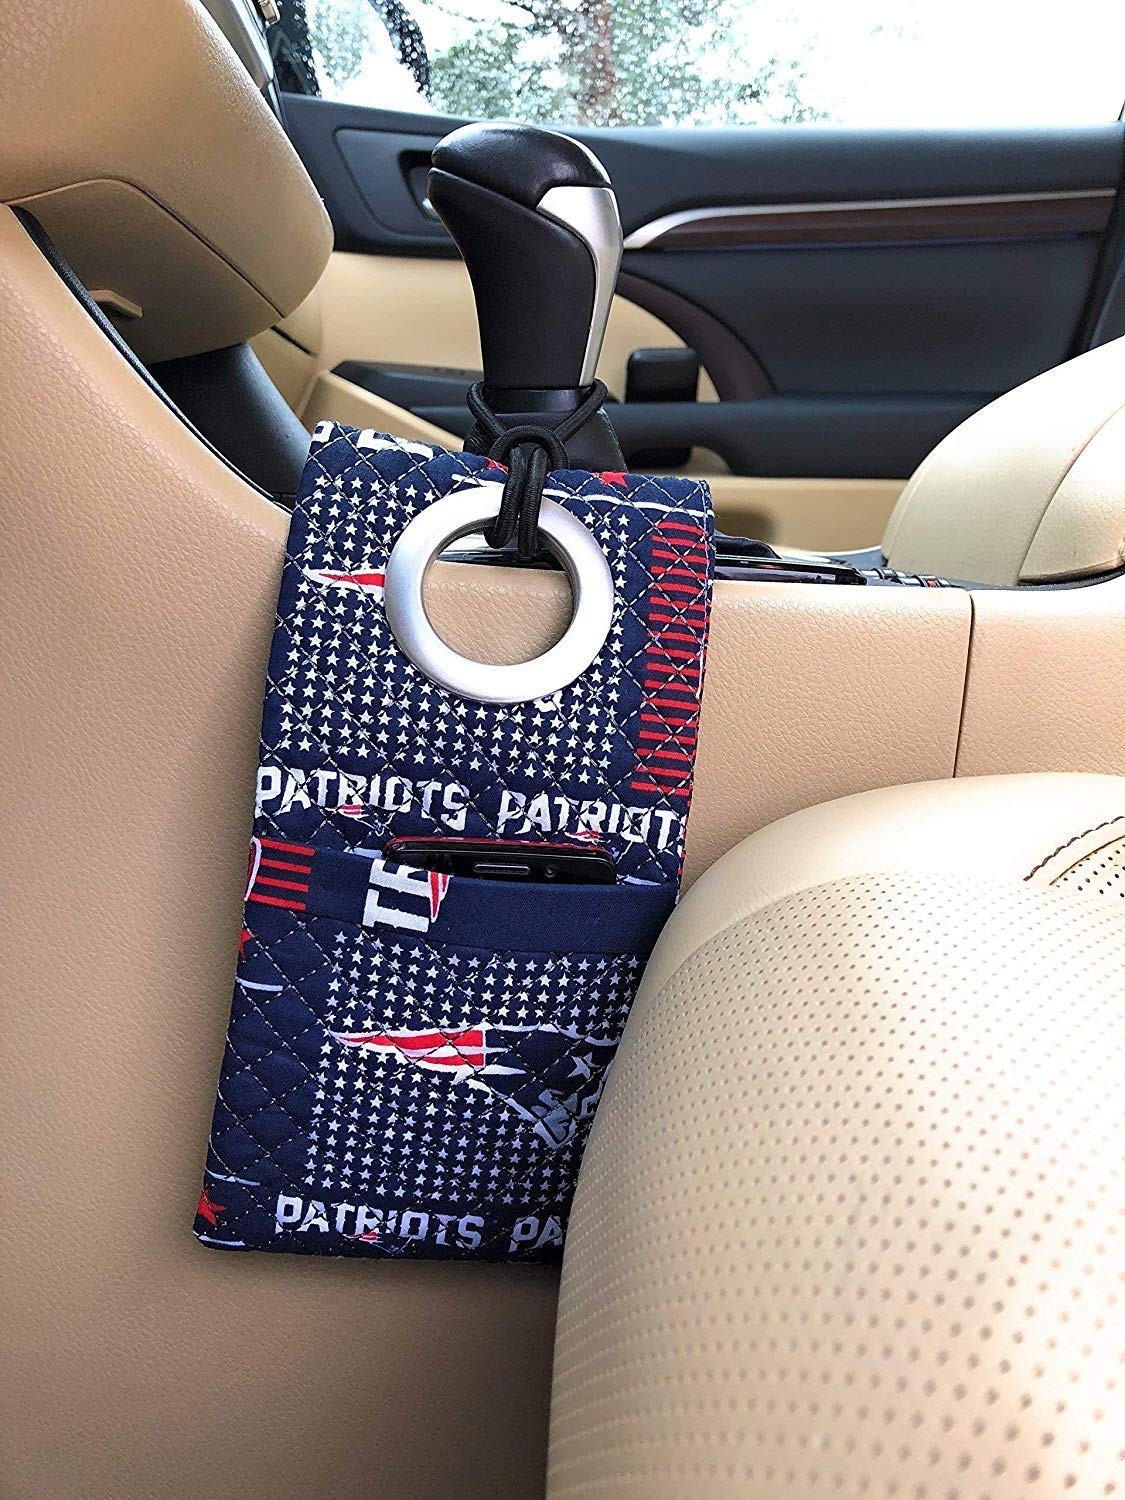 New England Patriots Car Accessories Patriots Gear for Men Remote Control Holder NFL Personalized Fa